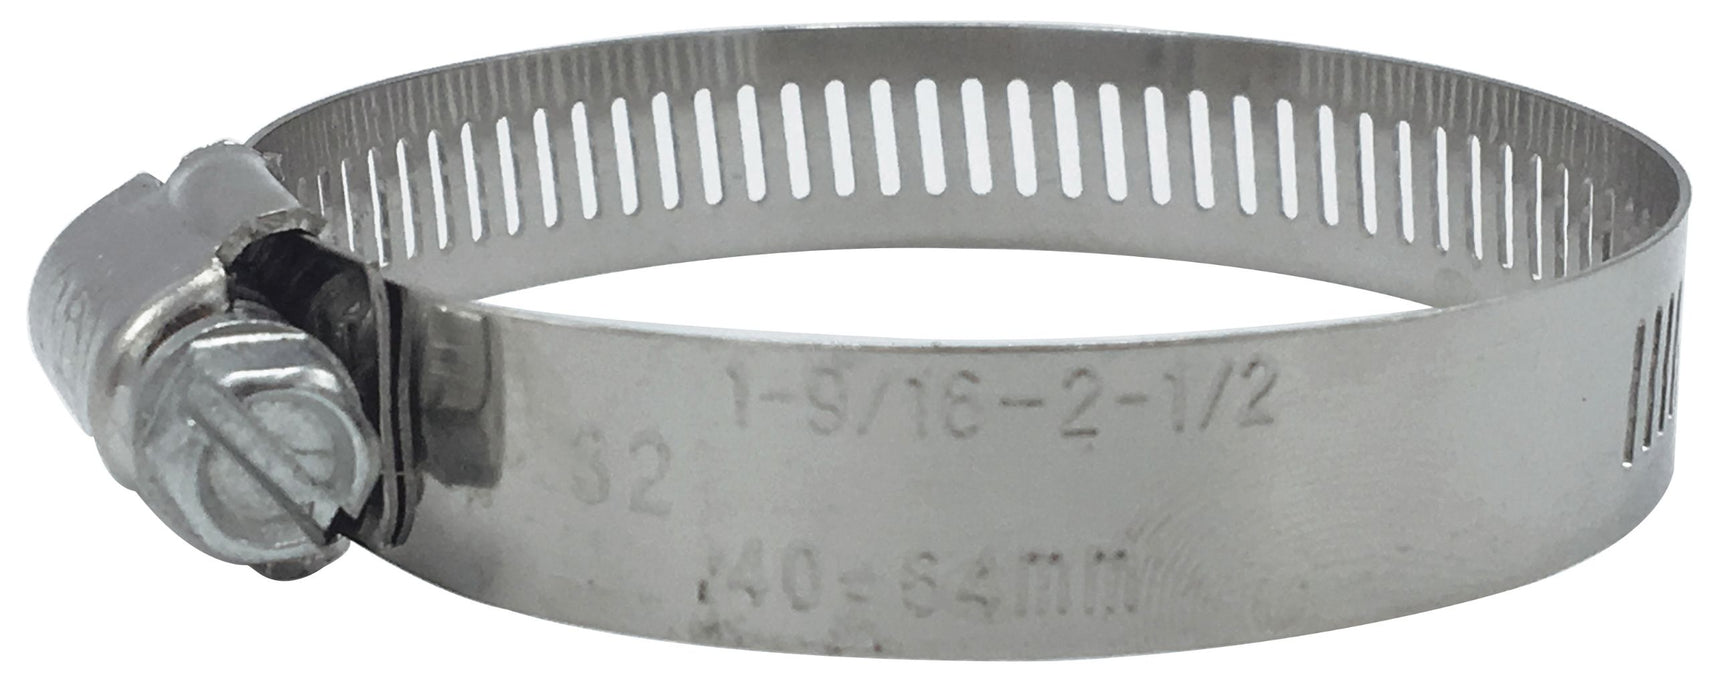 #16 1" Stainless Hose Clamp With Carbon Screw